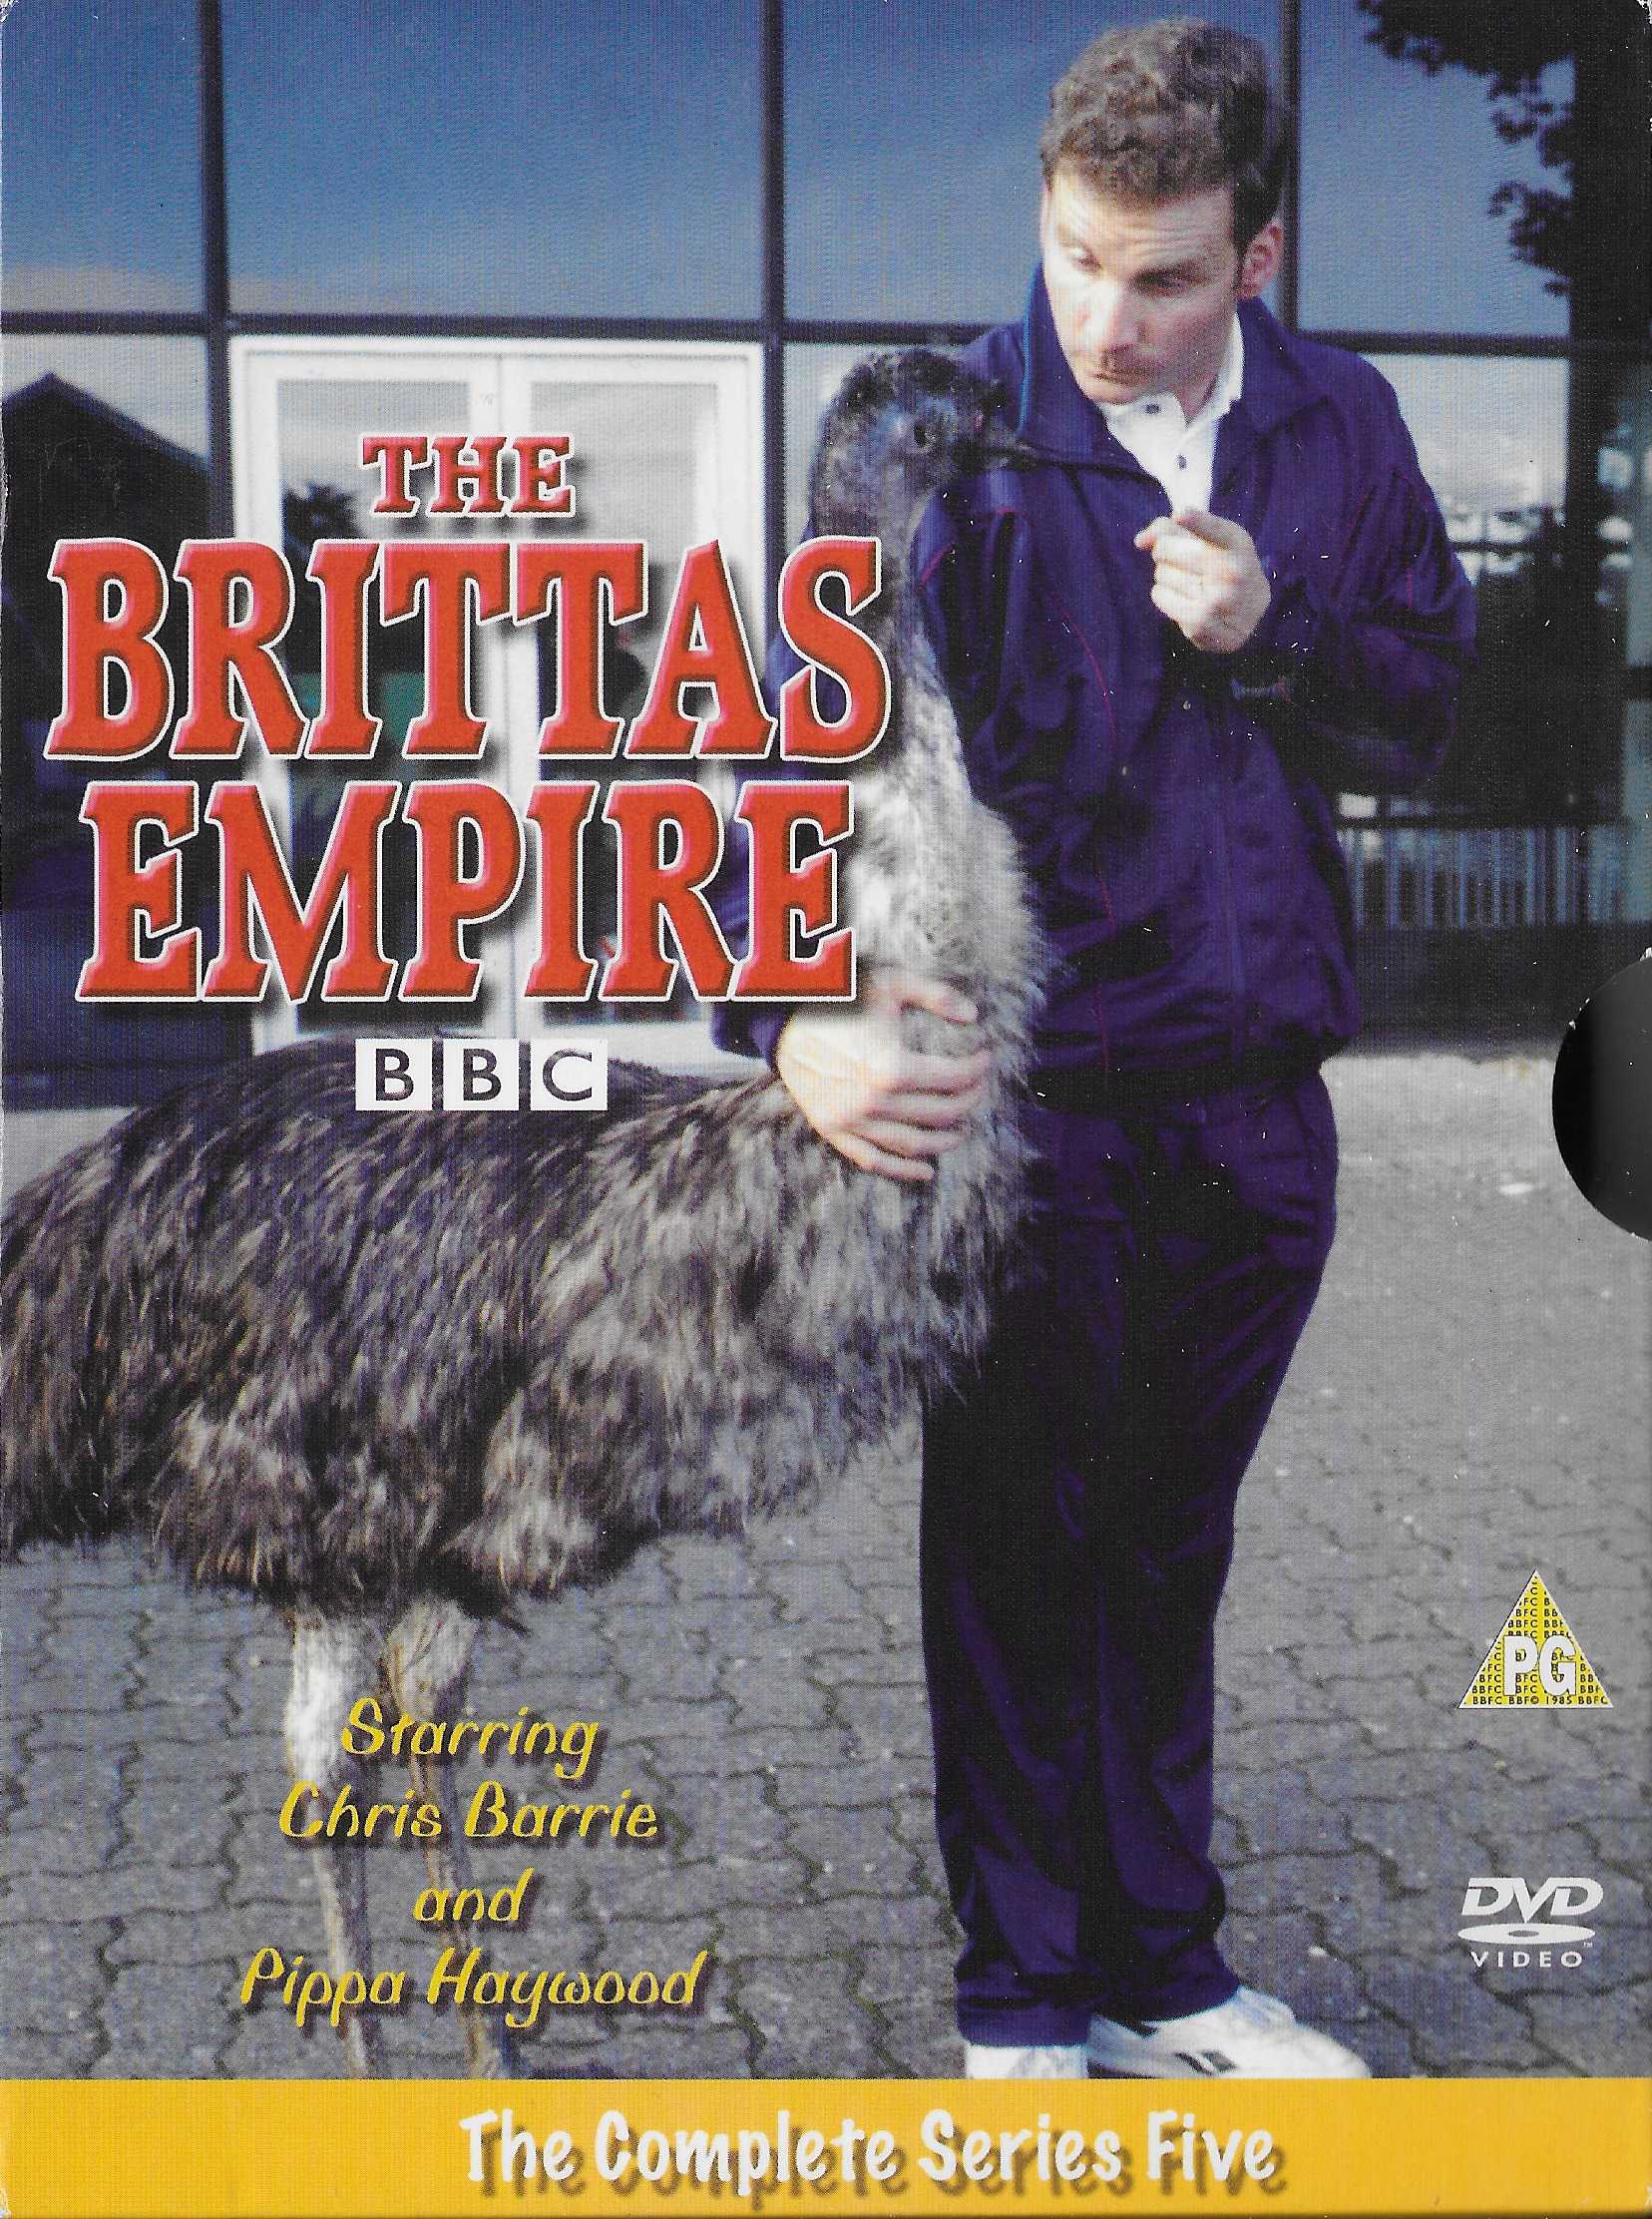 Picture of EKA 50017 The Brittas empire - Series 5 by artist Richard Fegen / Andrew Norriss from the BBC dvds - Records and Tapes library